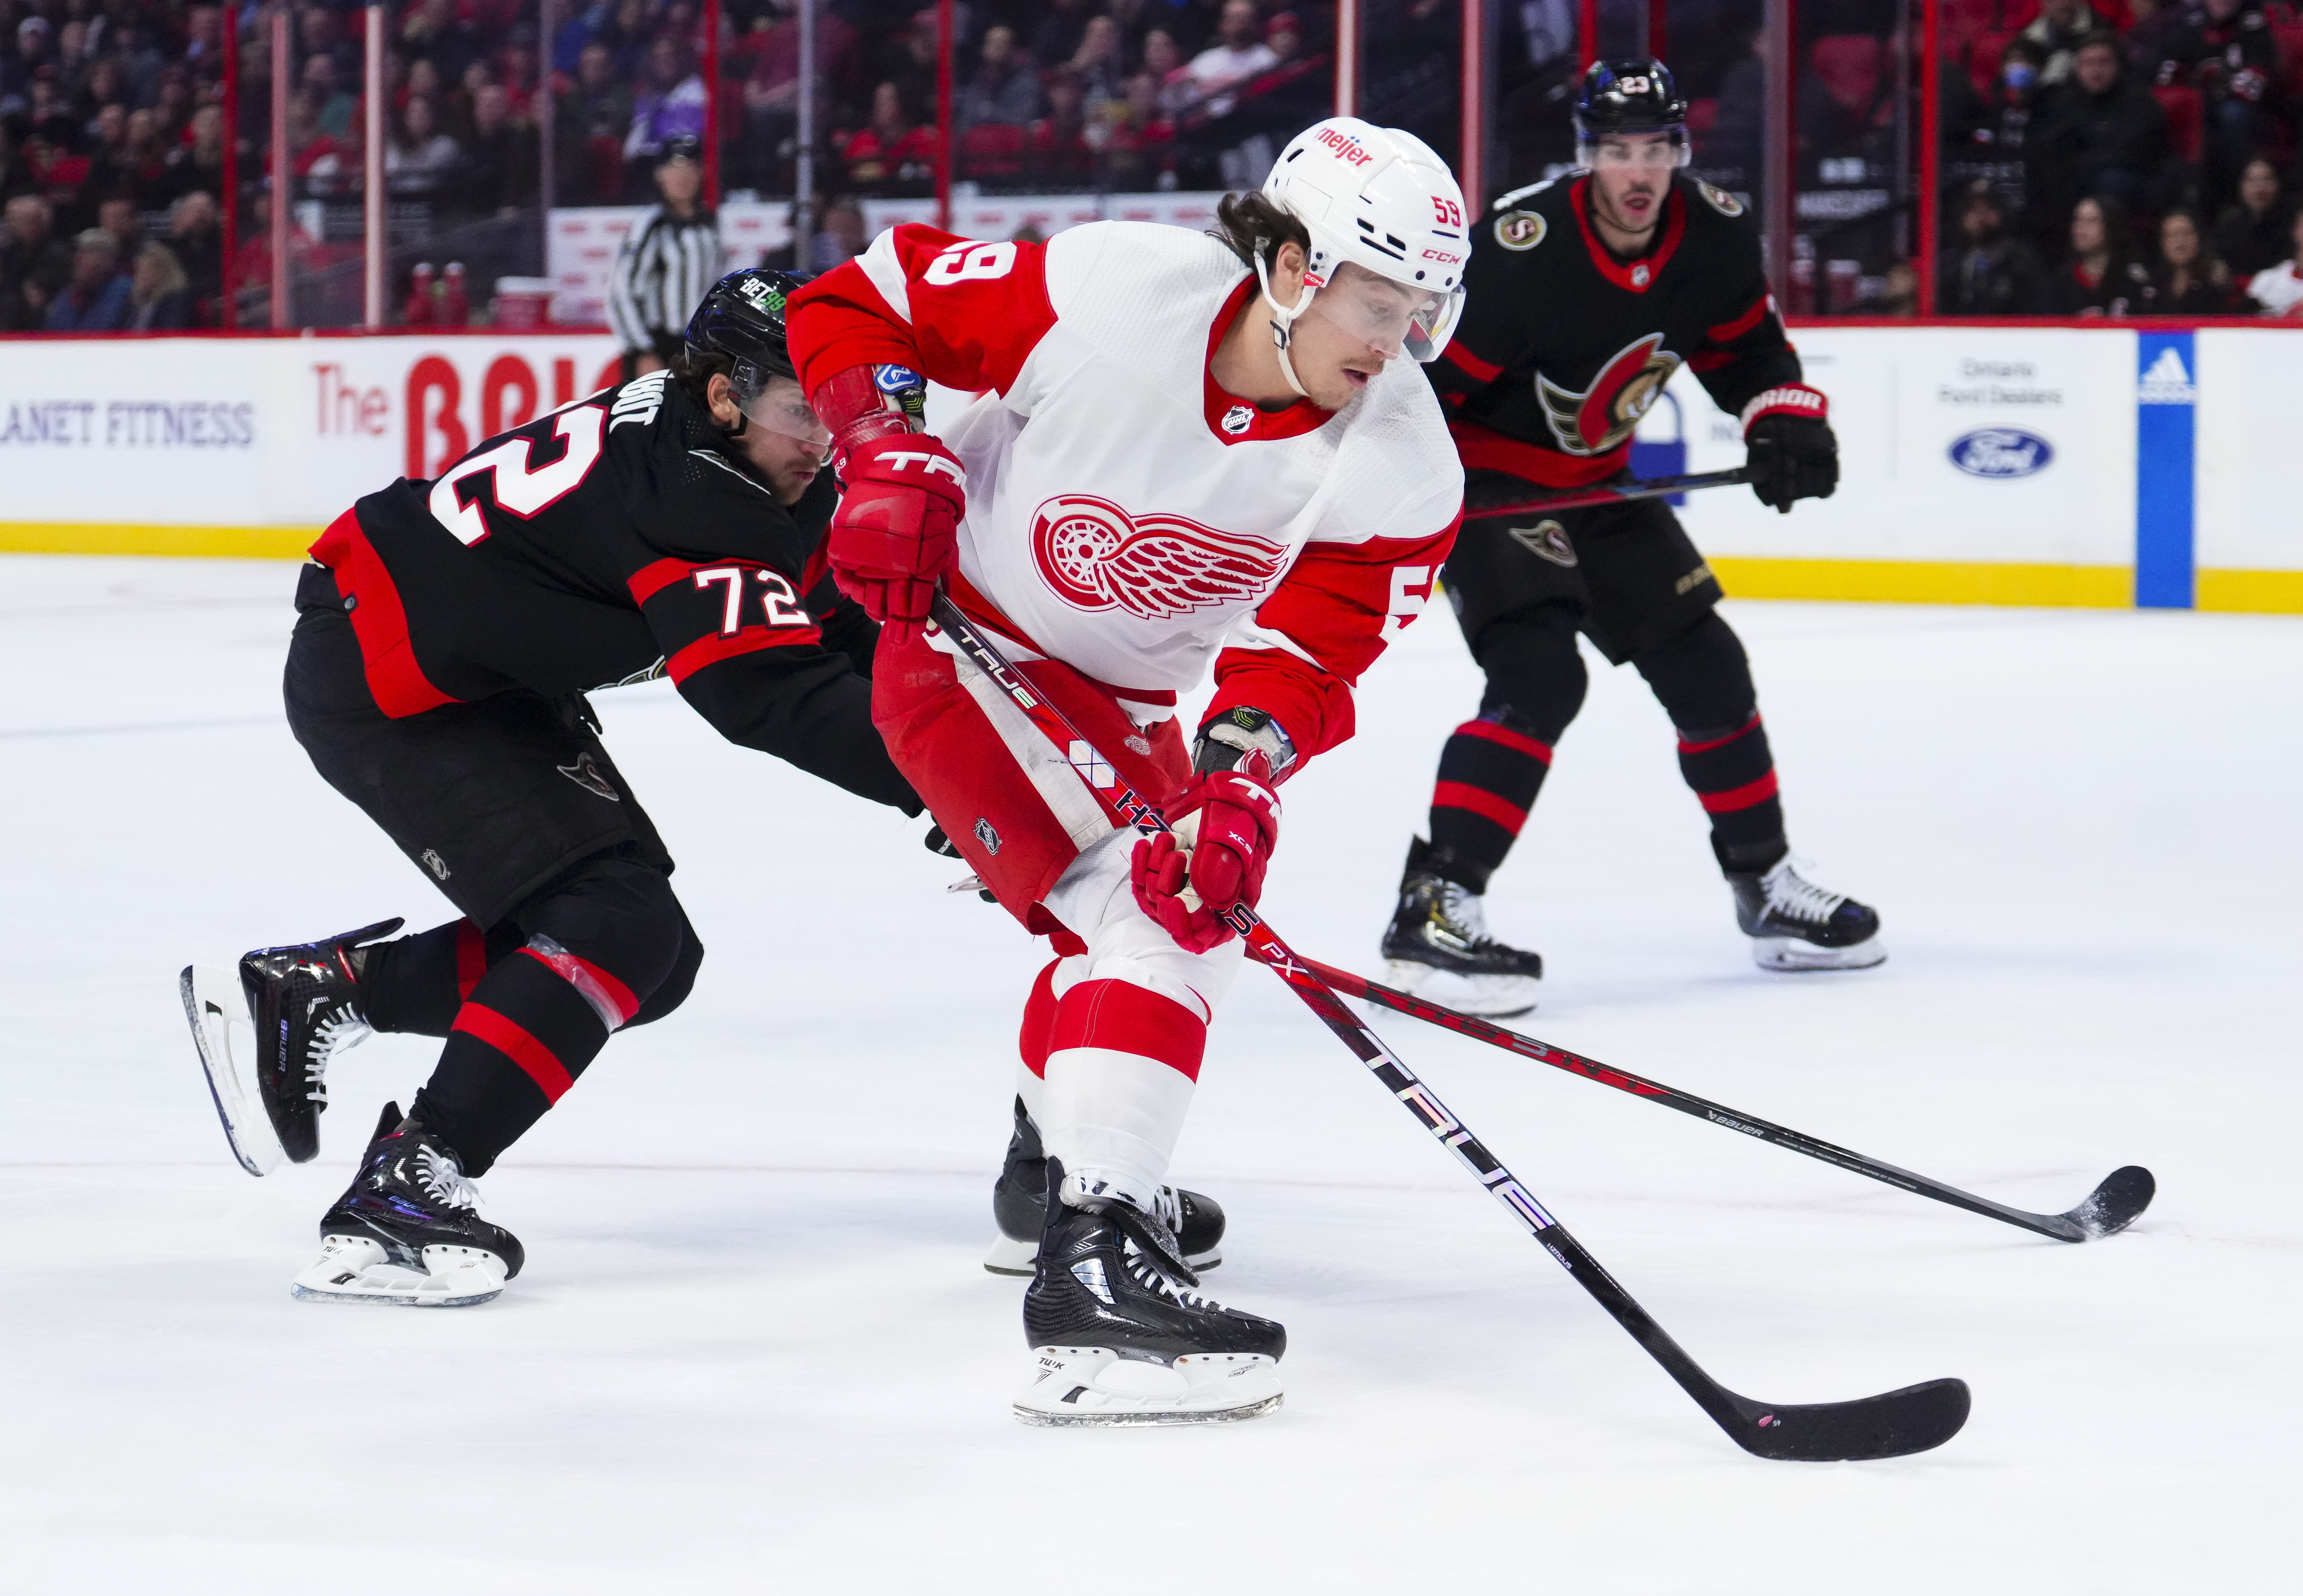 Red Wings' Bertuzzi: 'This Is Where I Want To Be